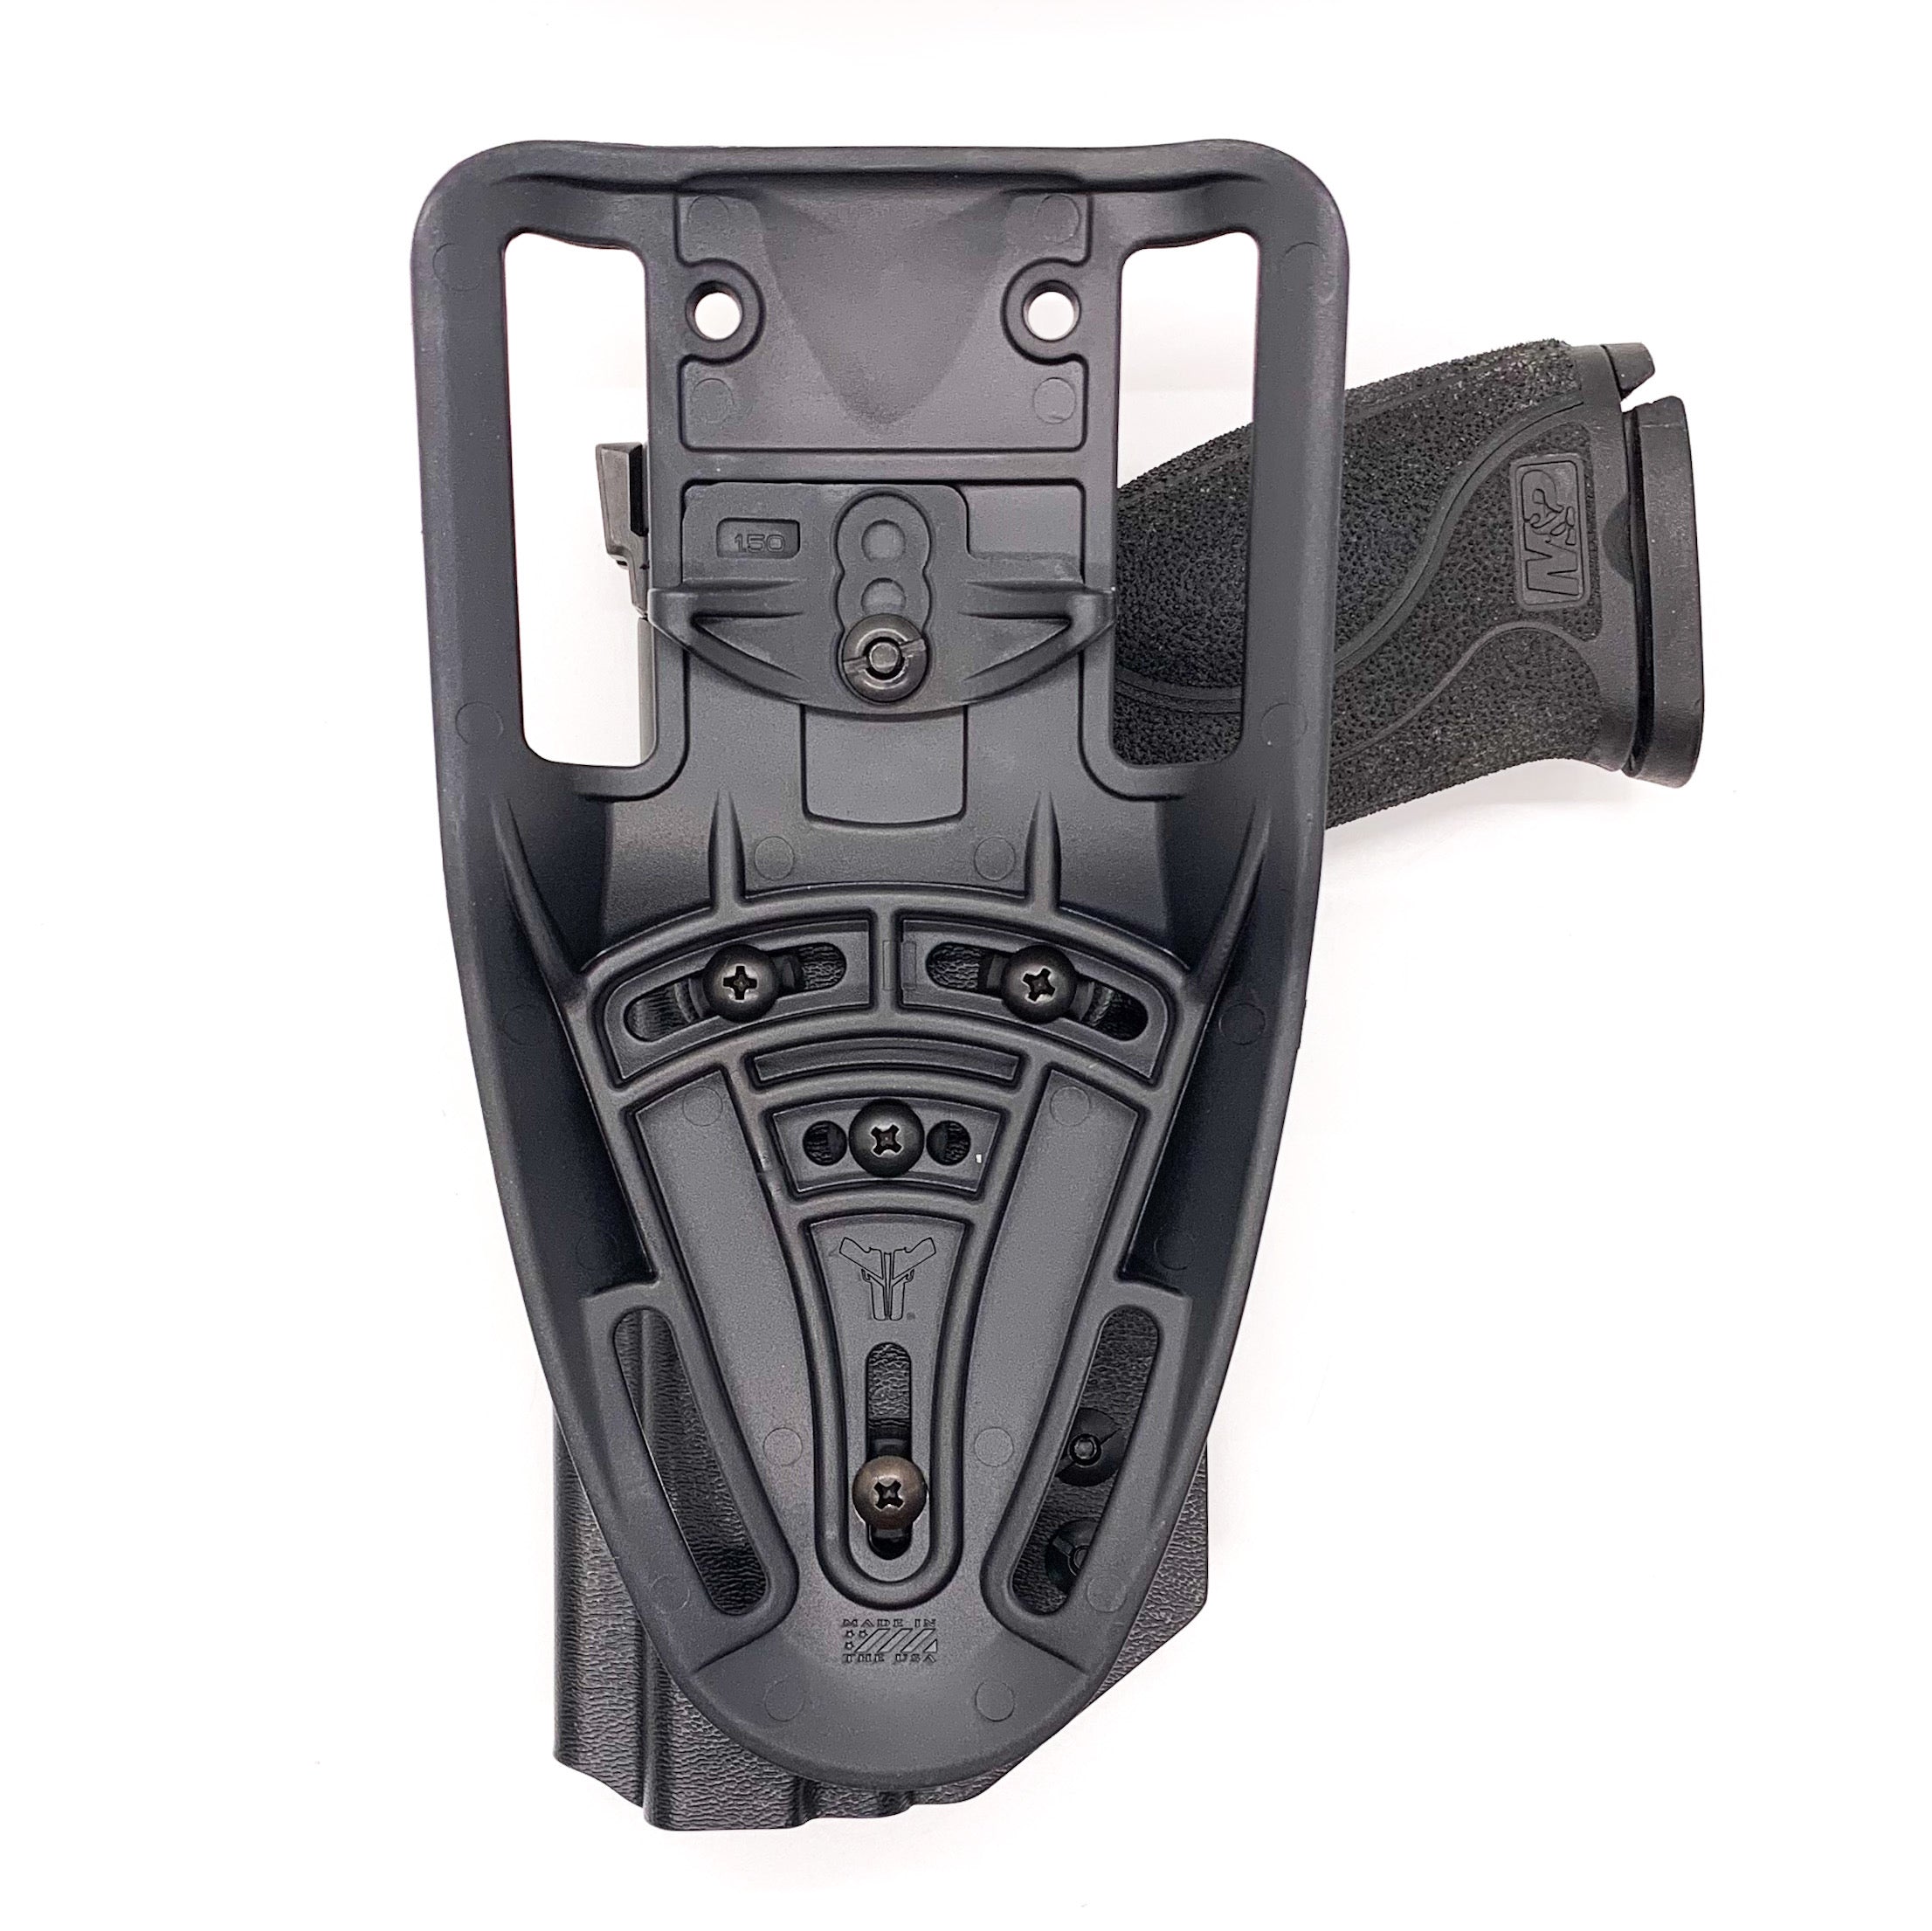 Outside Waistband Taco Style Holster designed to fit the Smith and Wesson M&P 4.25” pistol. Holster intended to be used for USPSA, 3-Gun, Steel Challenge and other competition shooting sports (May not be IDPA Legal). Holster is formed to fit both the 1.0 and 2. 0 generations. The holster will also fit the M&P Metal.